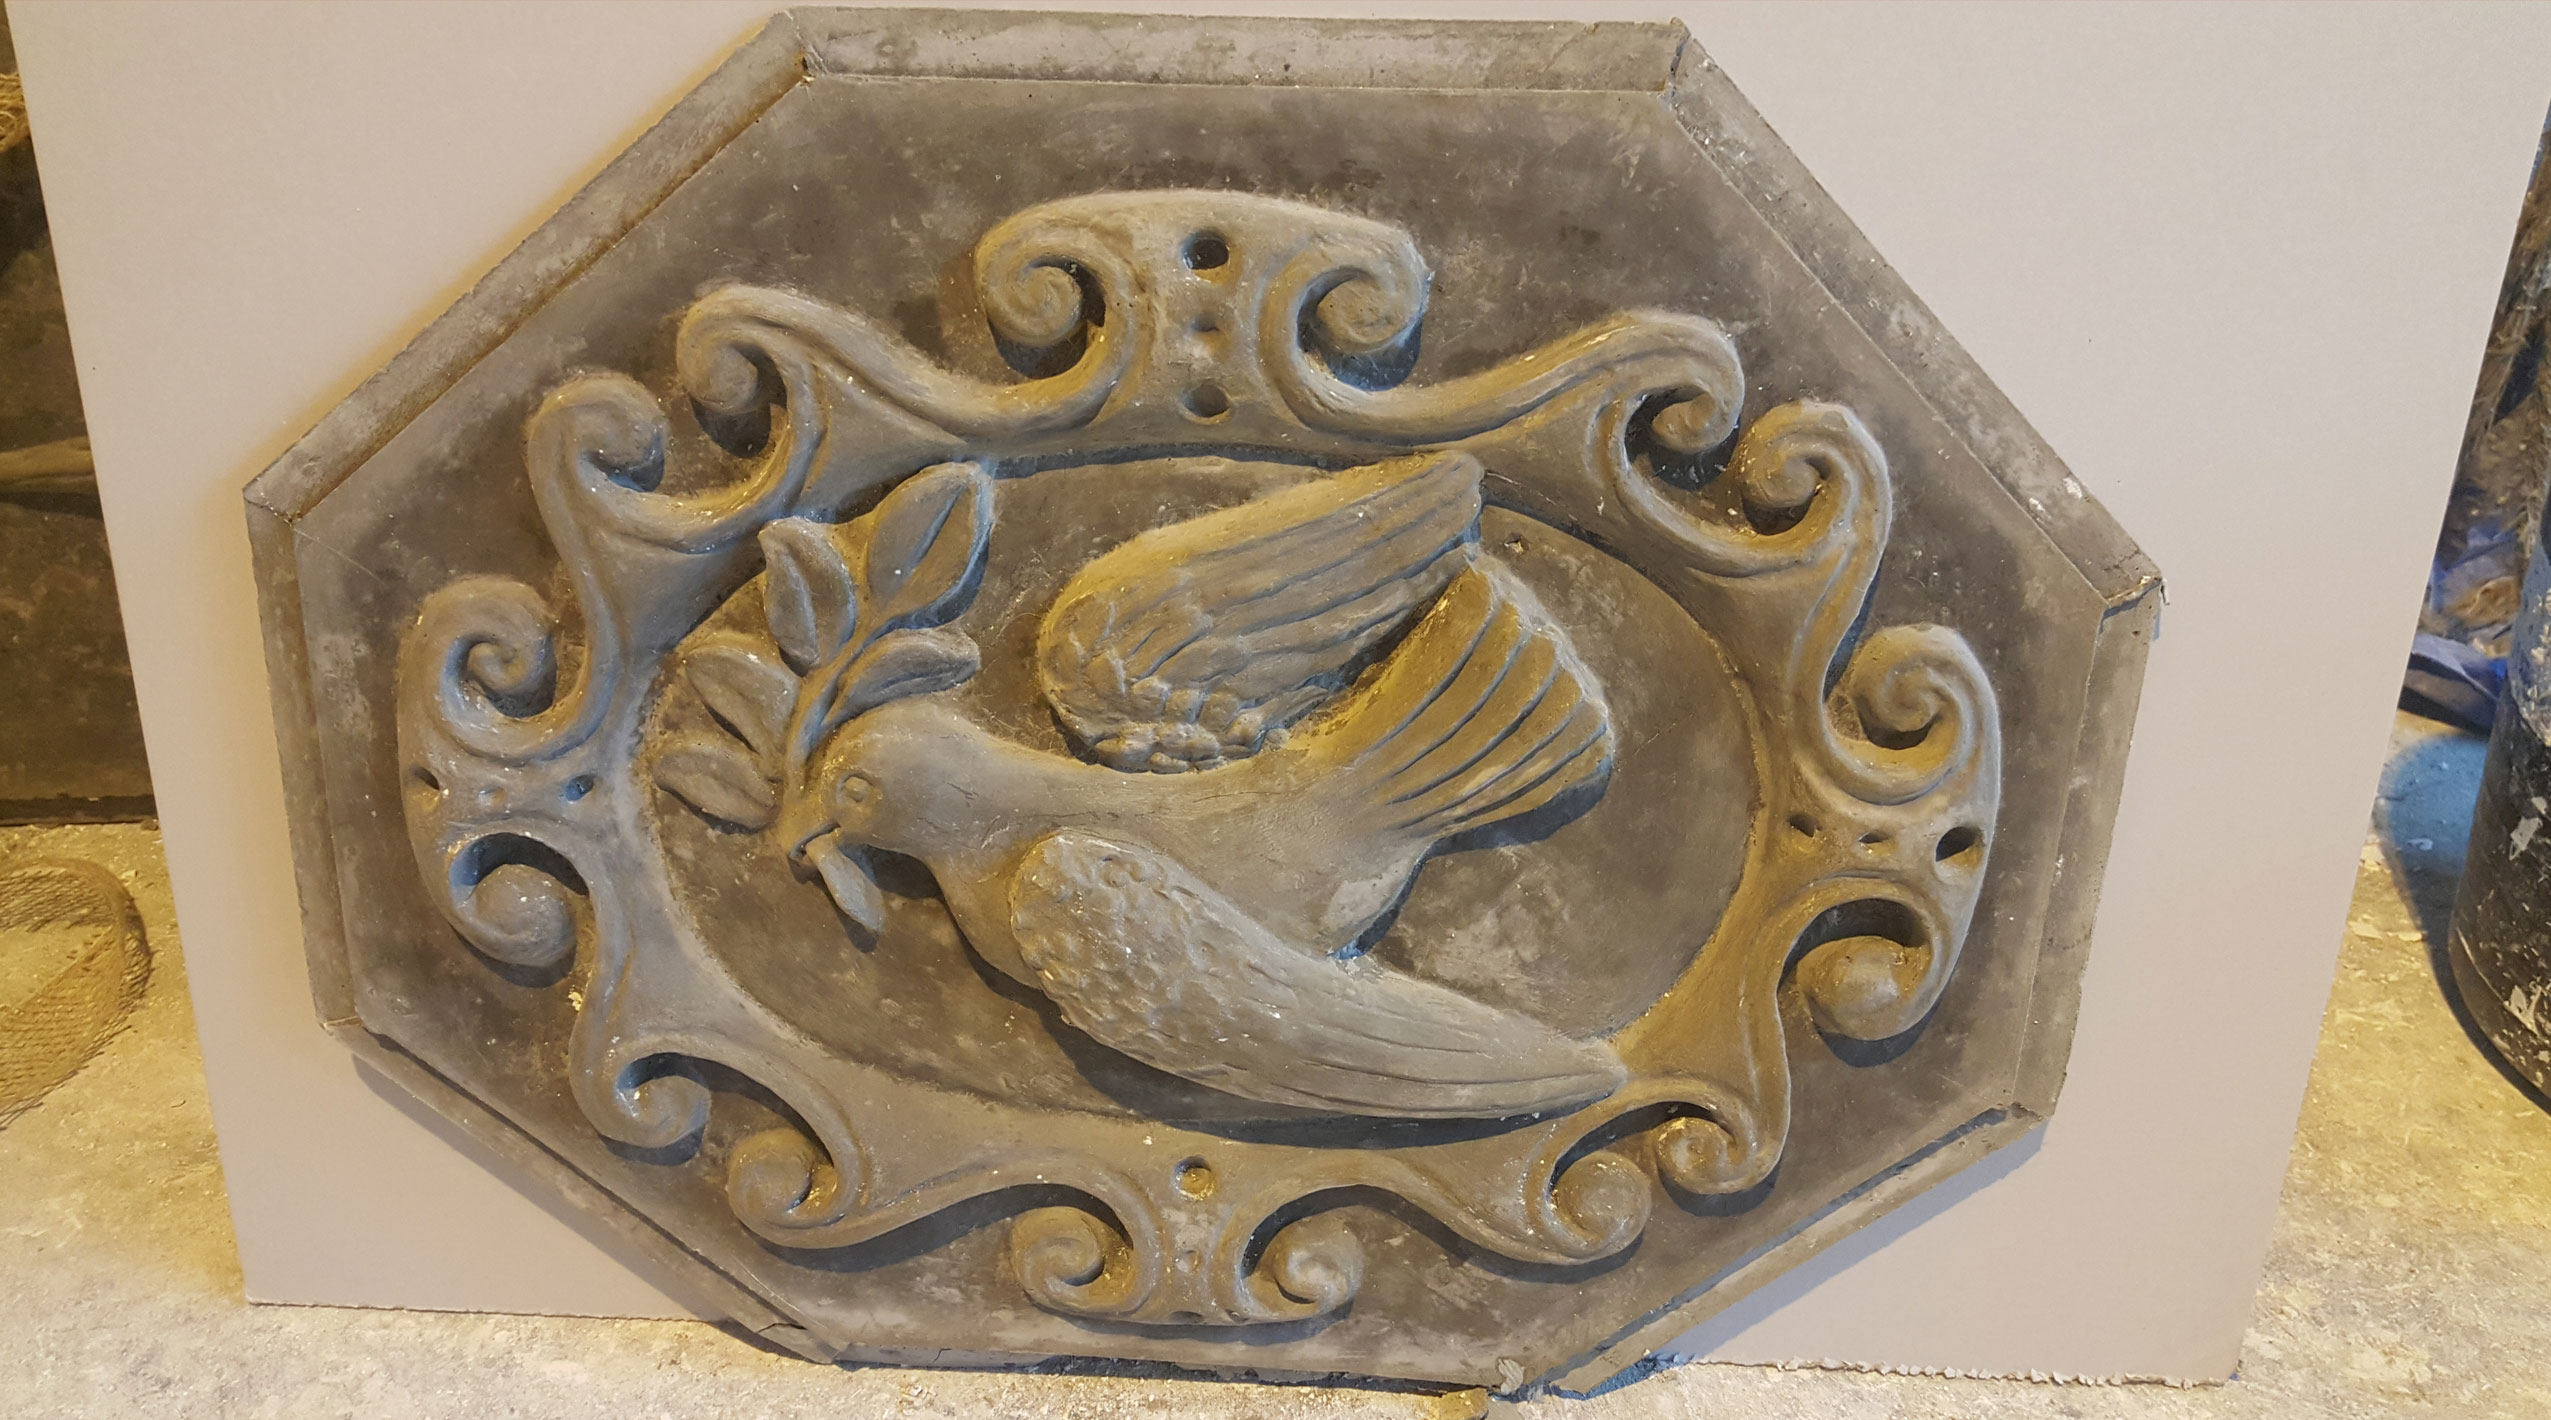 Dove Ornamentation from Coggeshall